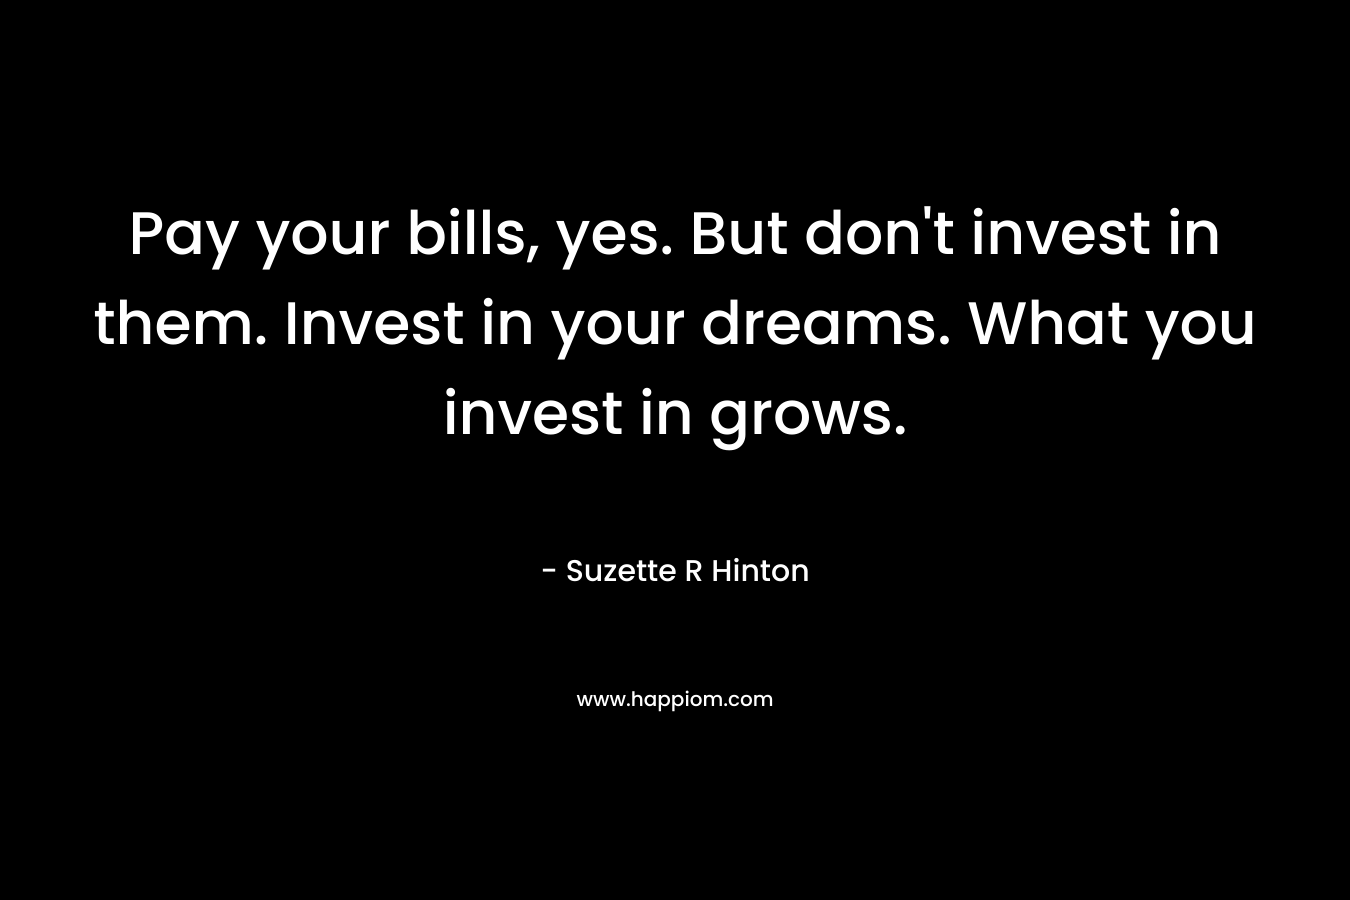 Pay your bills, yes. But don’t invest in them. Invest in your dreams. What you invest in grows. – Suzette R Hinton